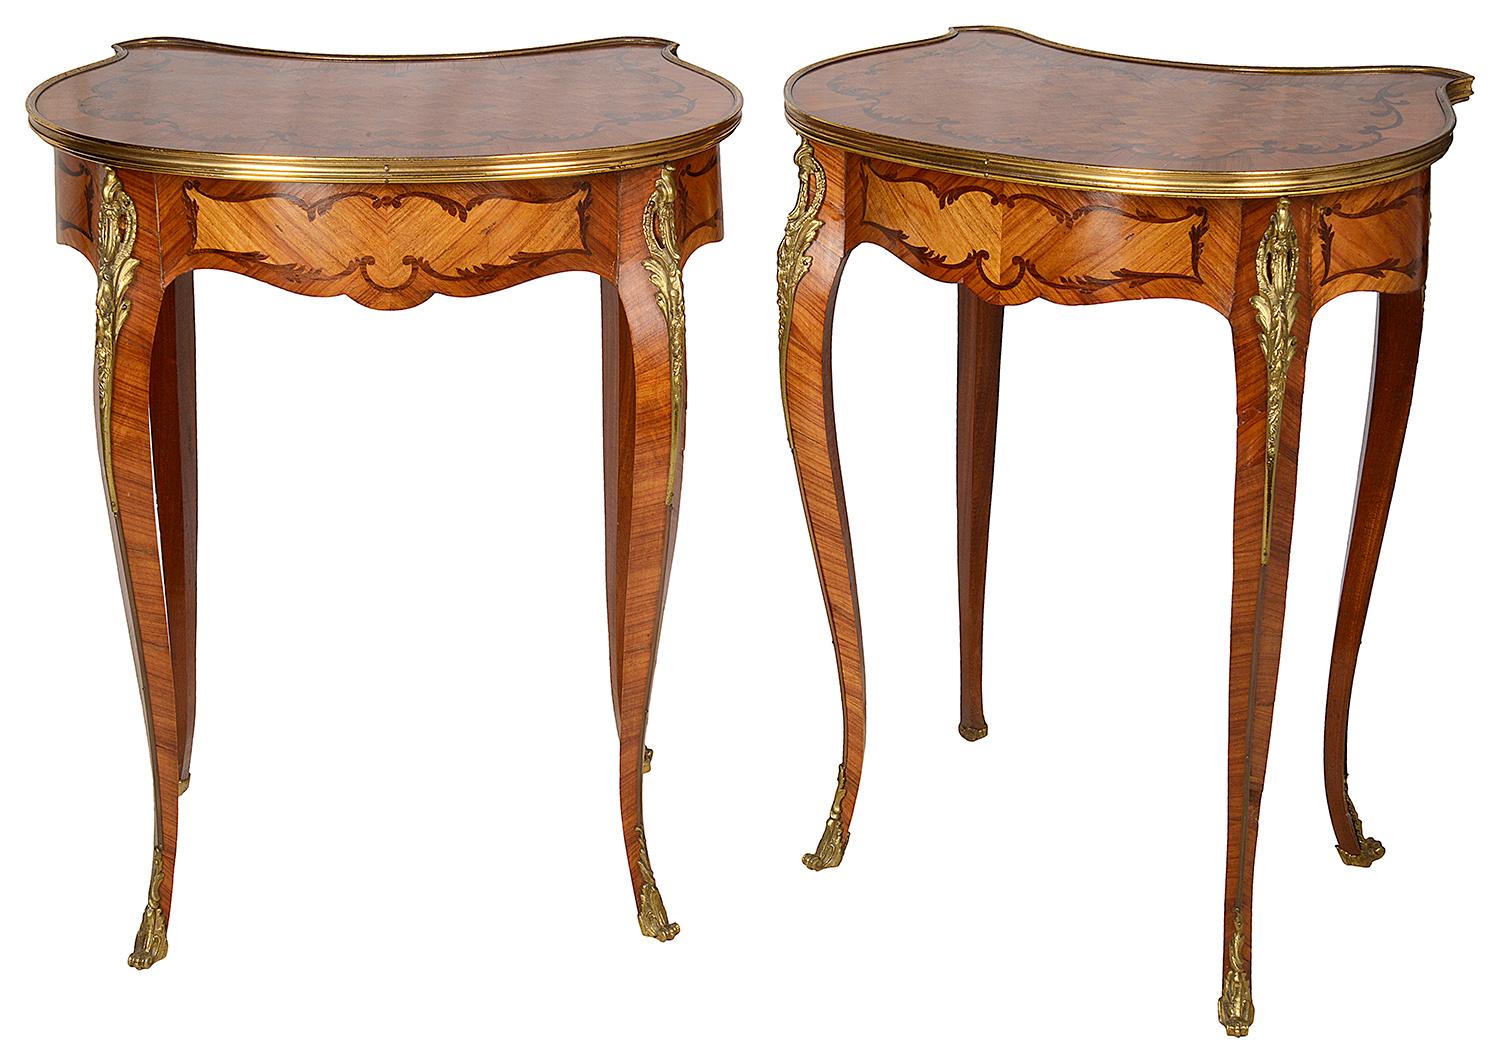 A good quality pair of Louis XVI style parquetry inlaid ormolu-mounted side tables, each with a single frieze drawers and raised on elegant cabriole legs terminating in scrolling ormolu feet.